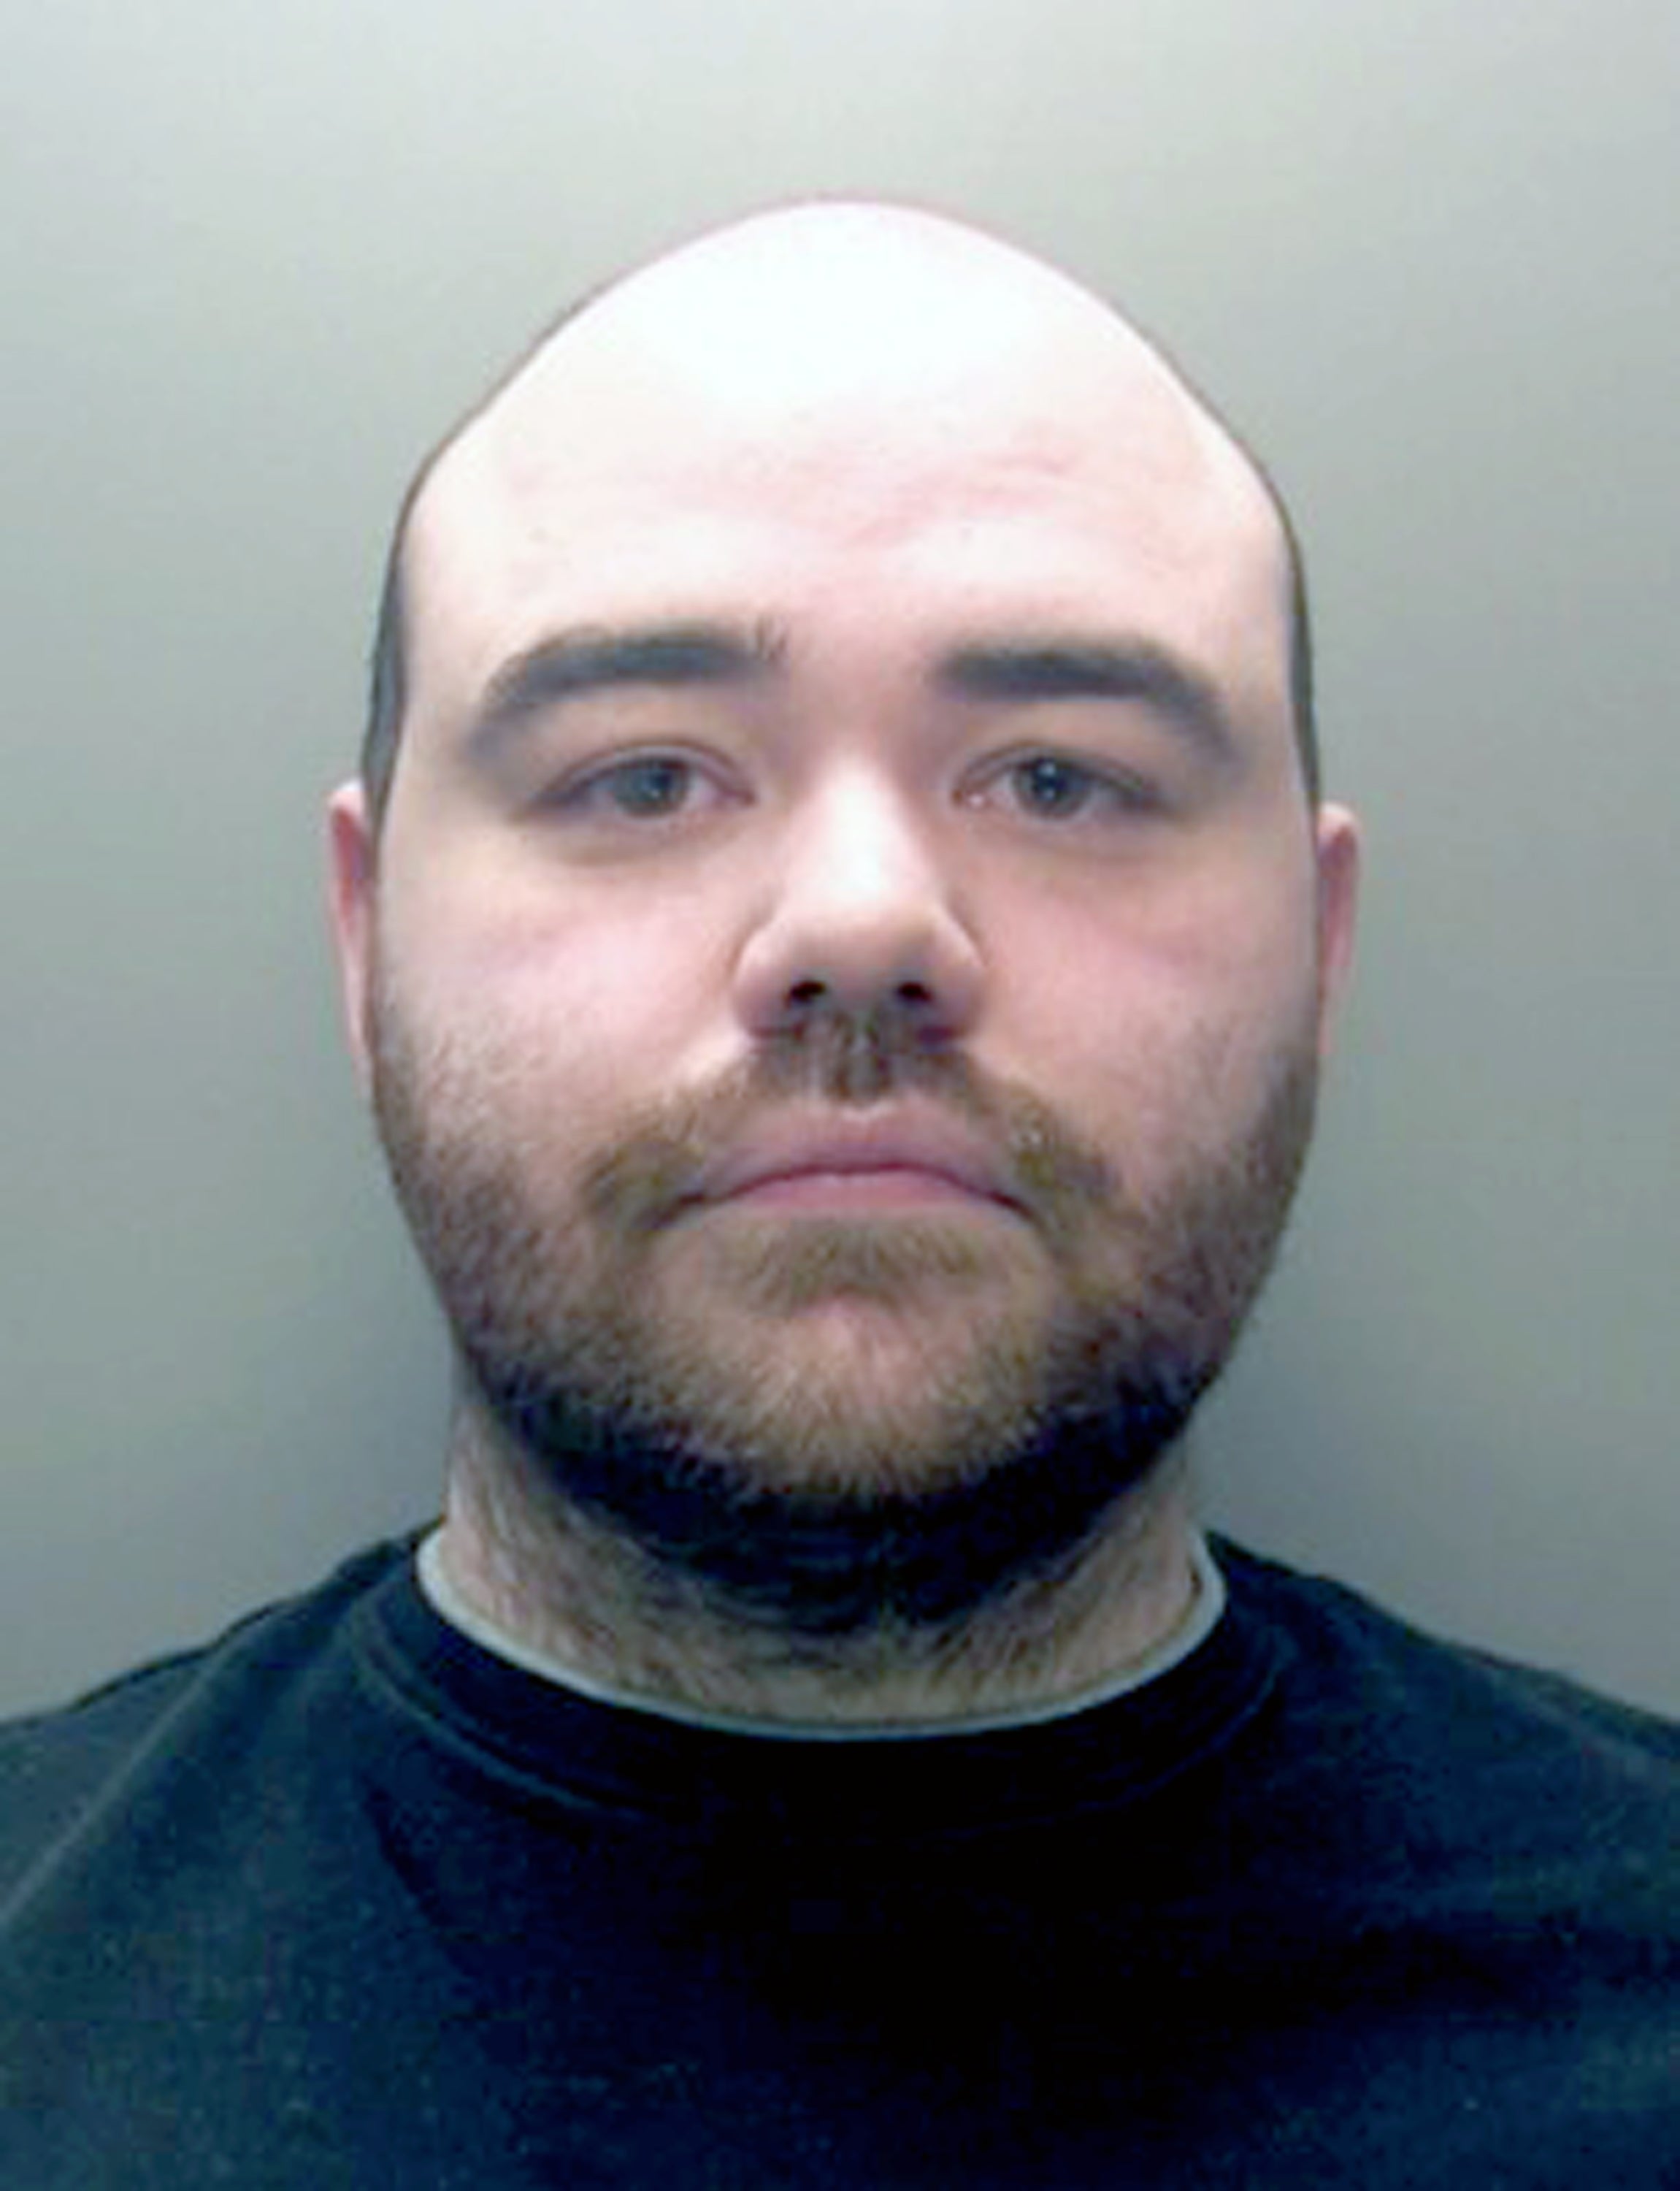 Ashley Williams, 32, of Newport, Gwent, was jailed for four years and six months